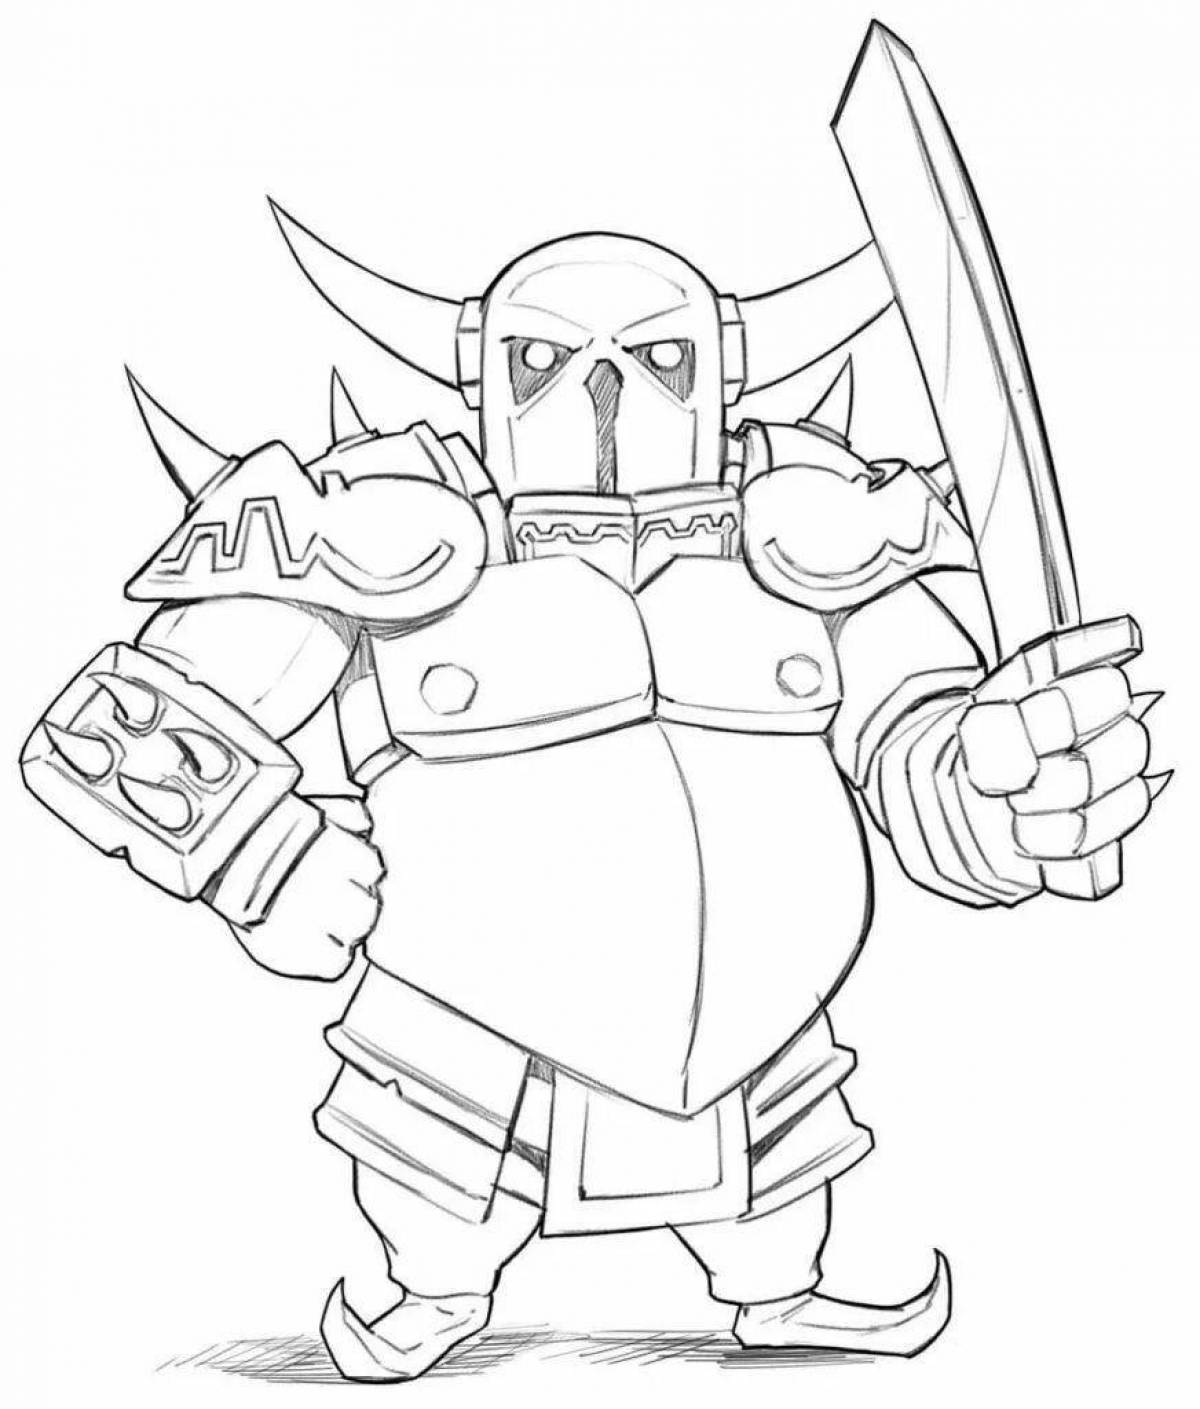 Amazing clash royale arena coloring page